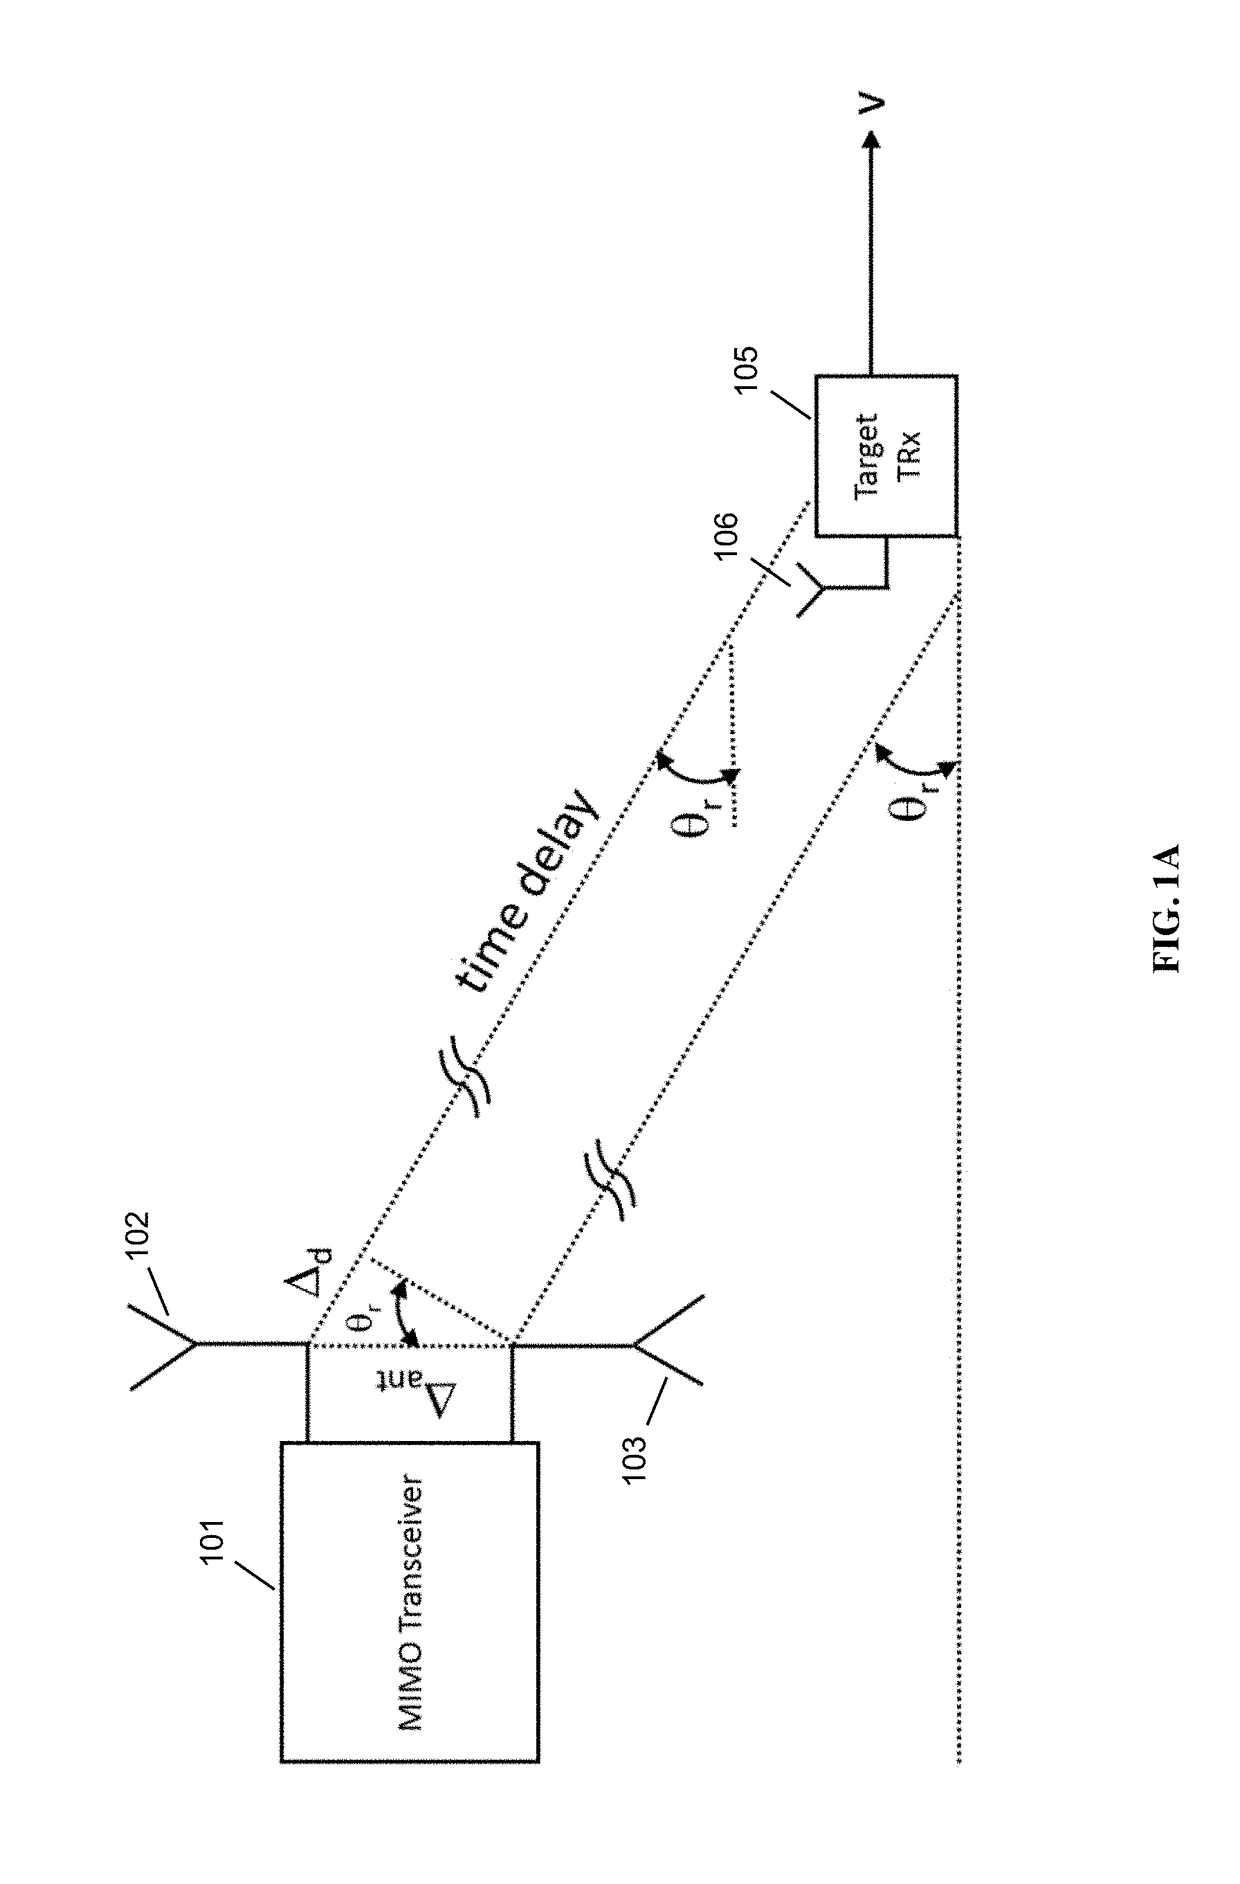 Angle of Arrival Measurements Using RF Carrier Synchronization and Phase Alignment Methods